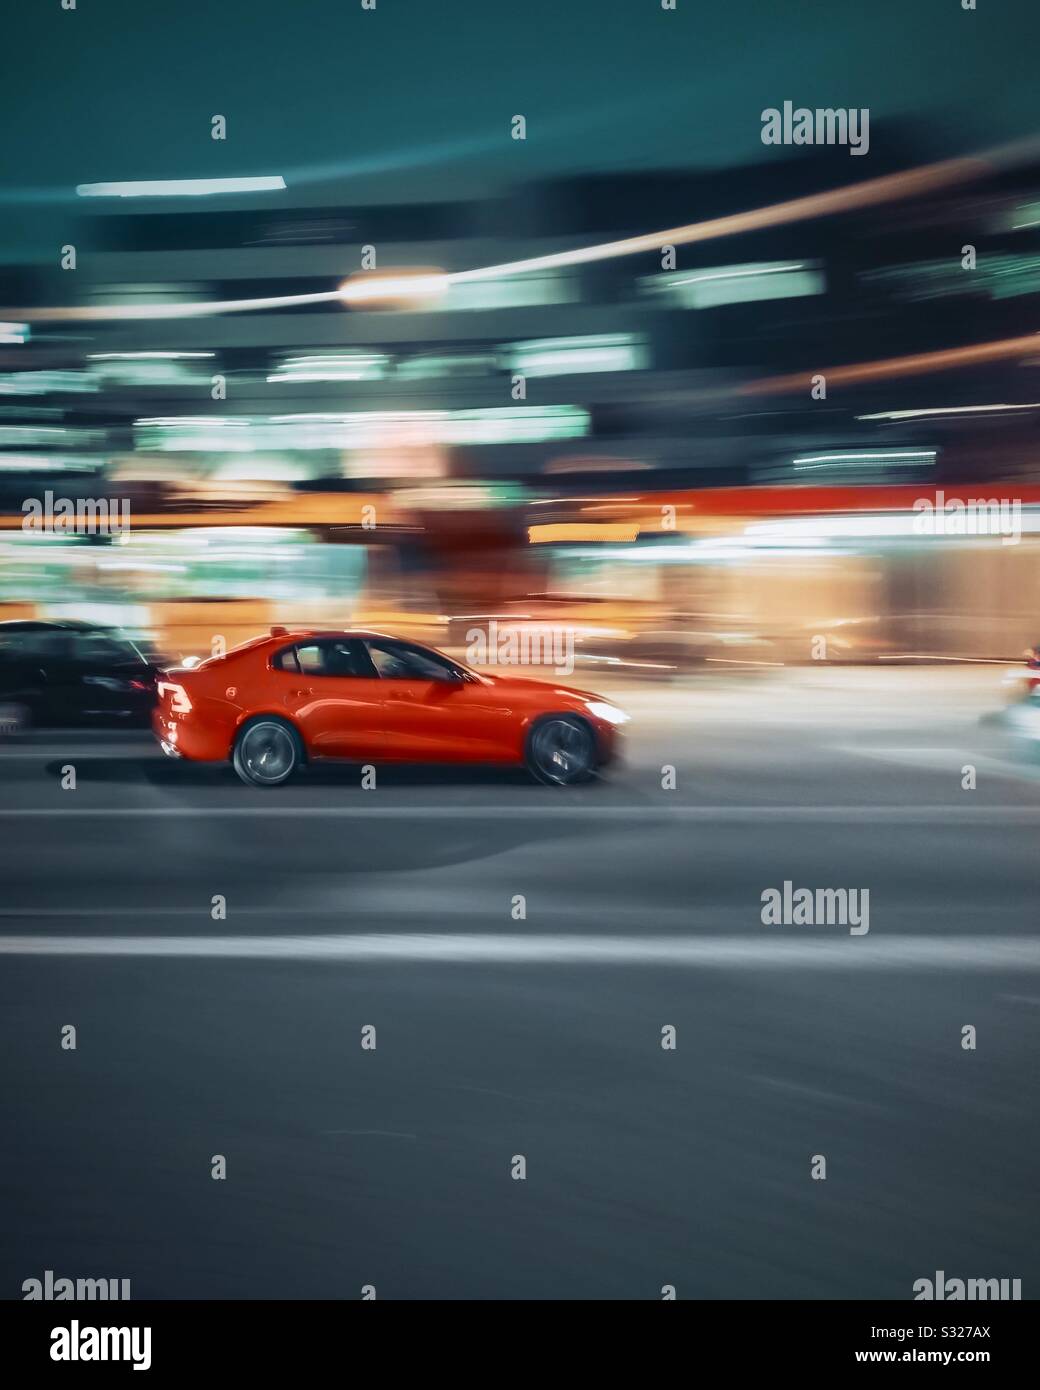 Red car driving fast Stock Photo